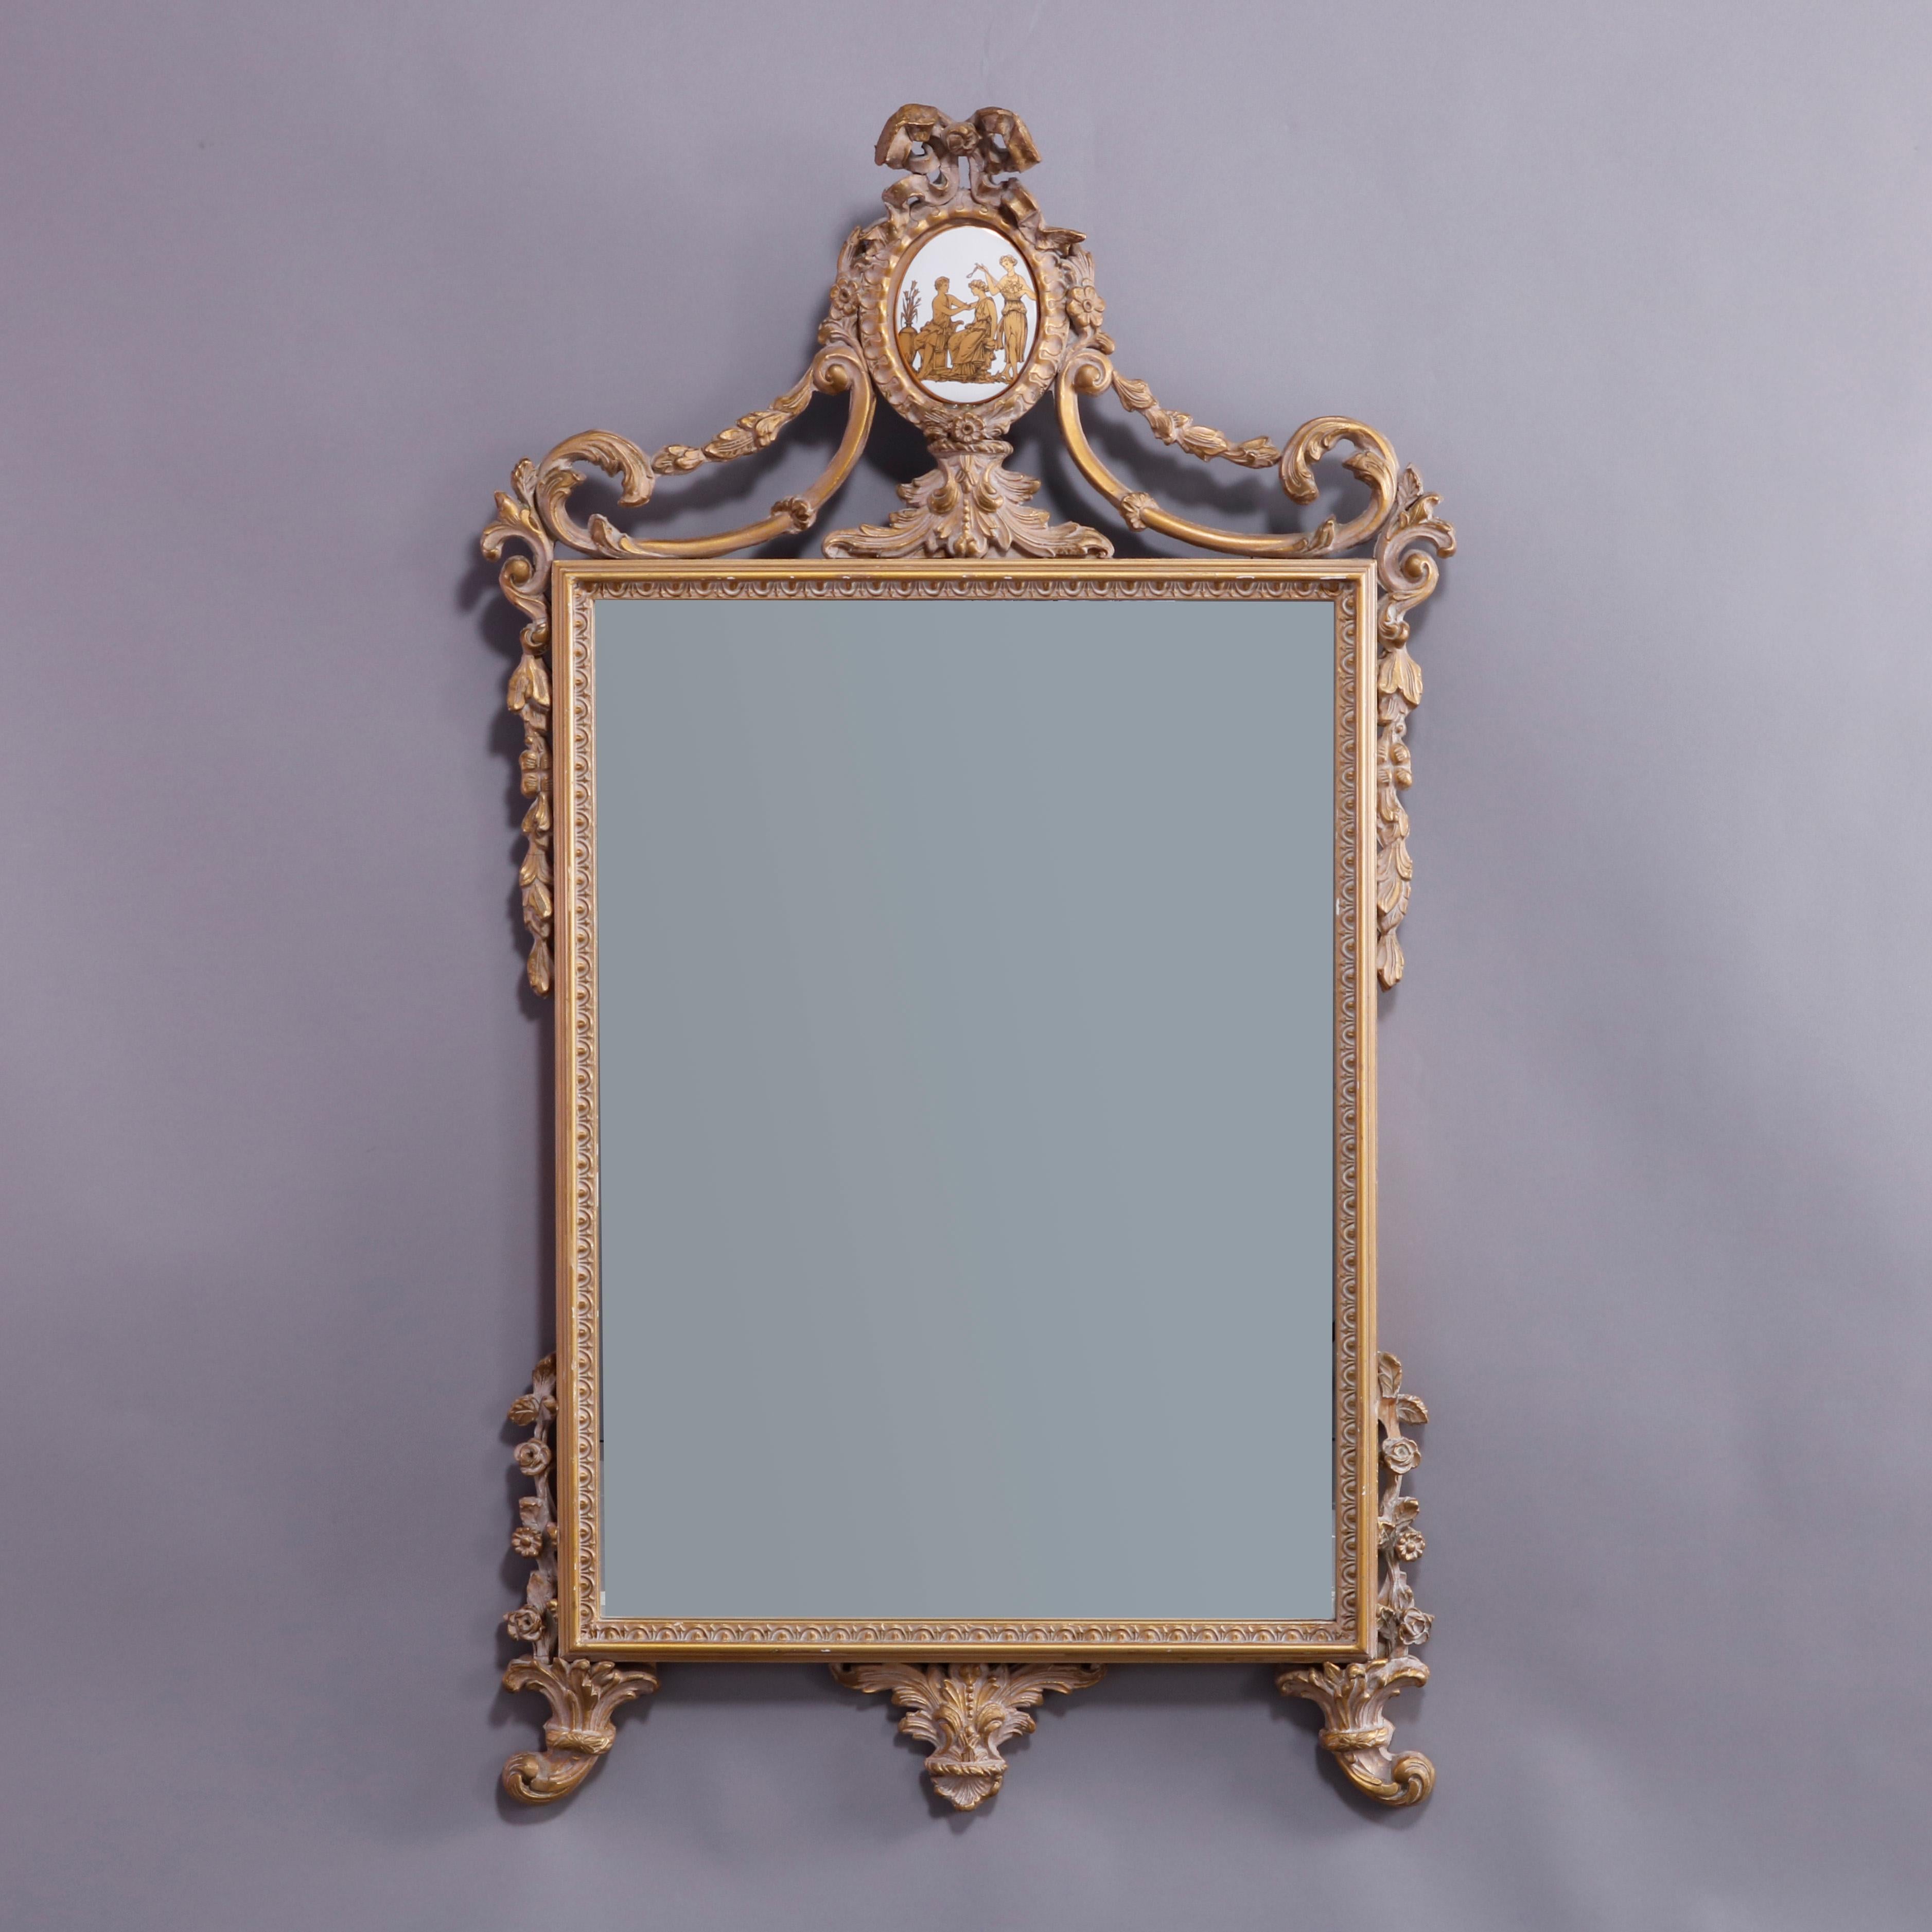 20th Century Large French Neoclassical Gilt Wall Mirror & Porcelain Plaque, 20th C